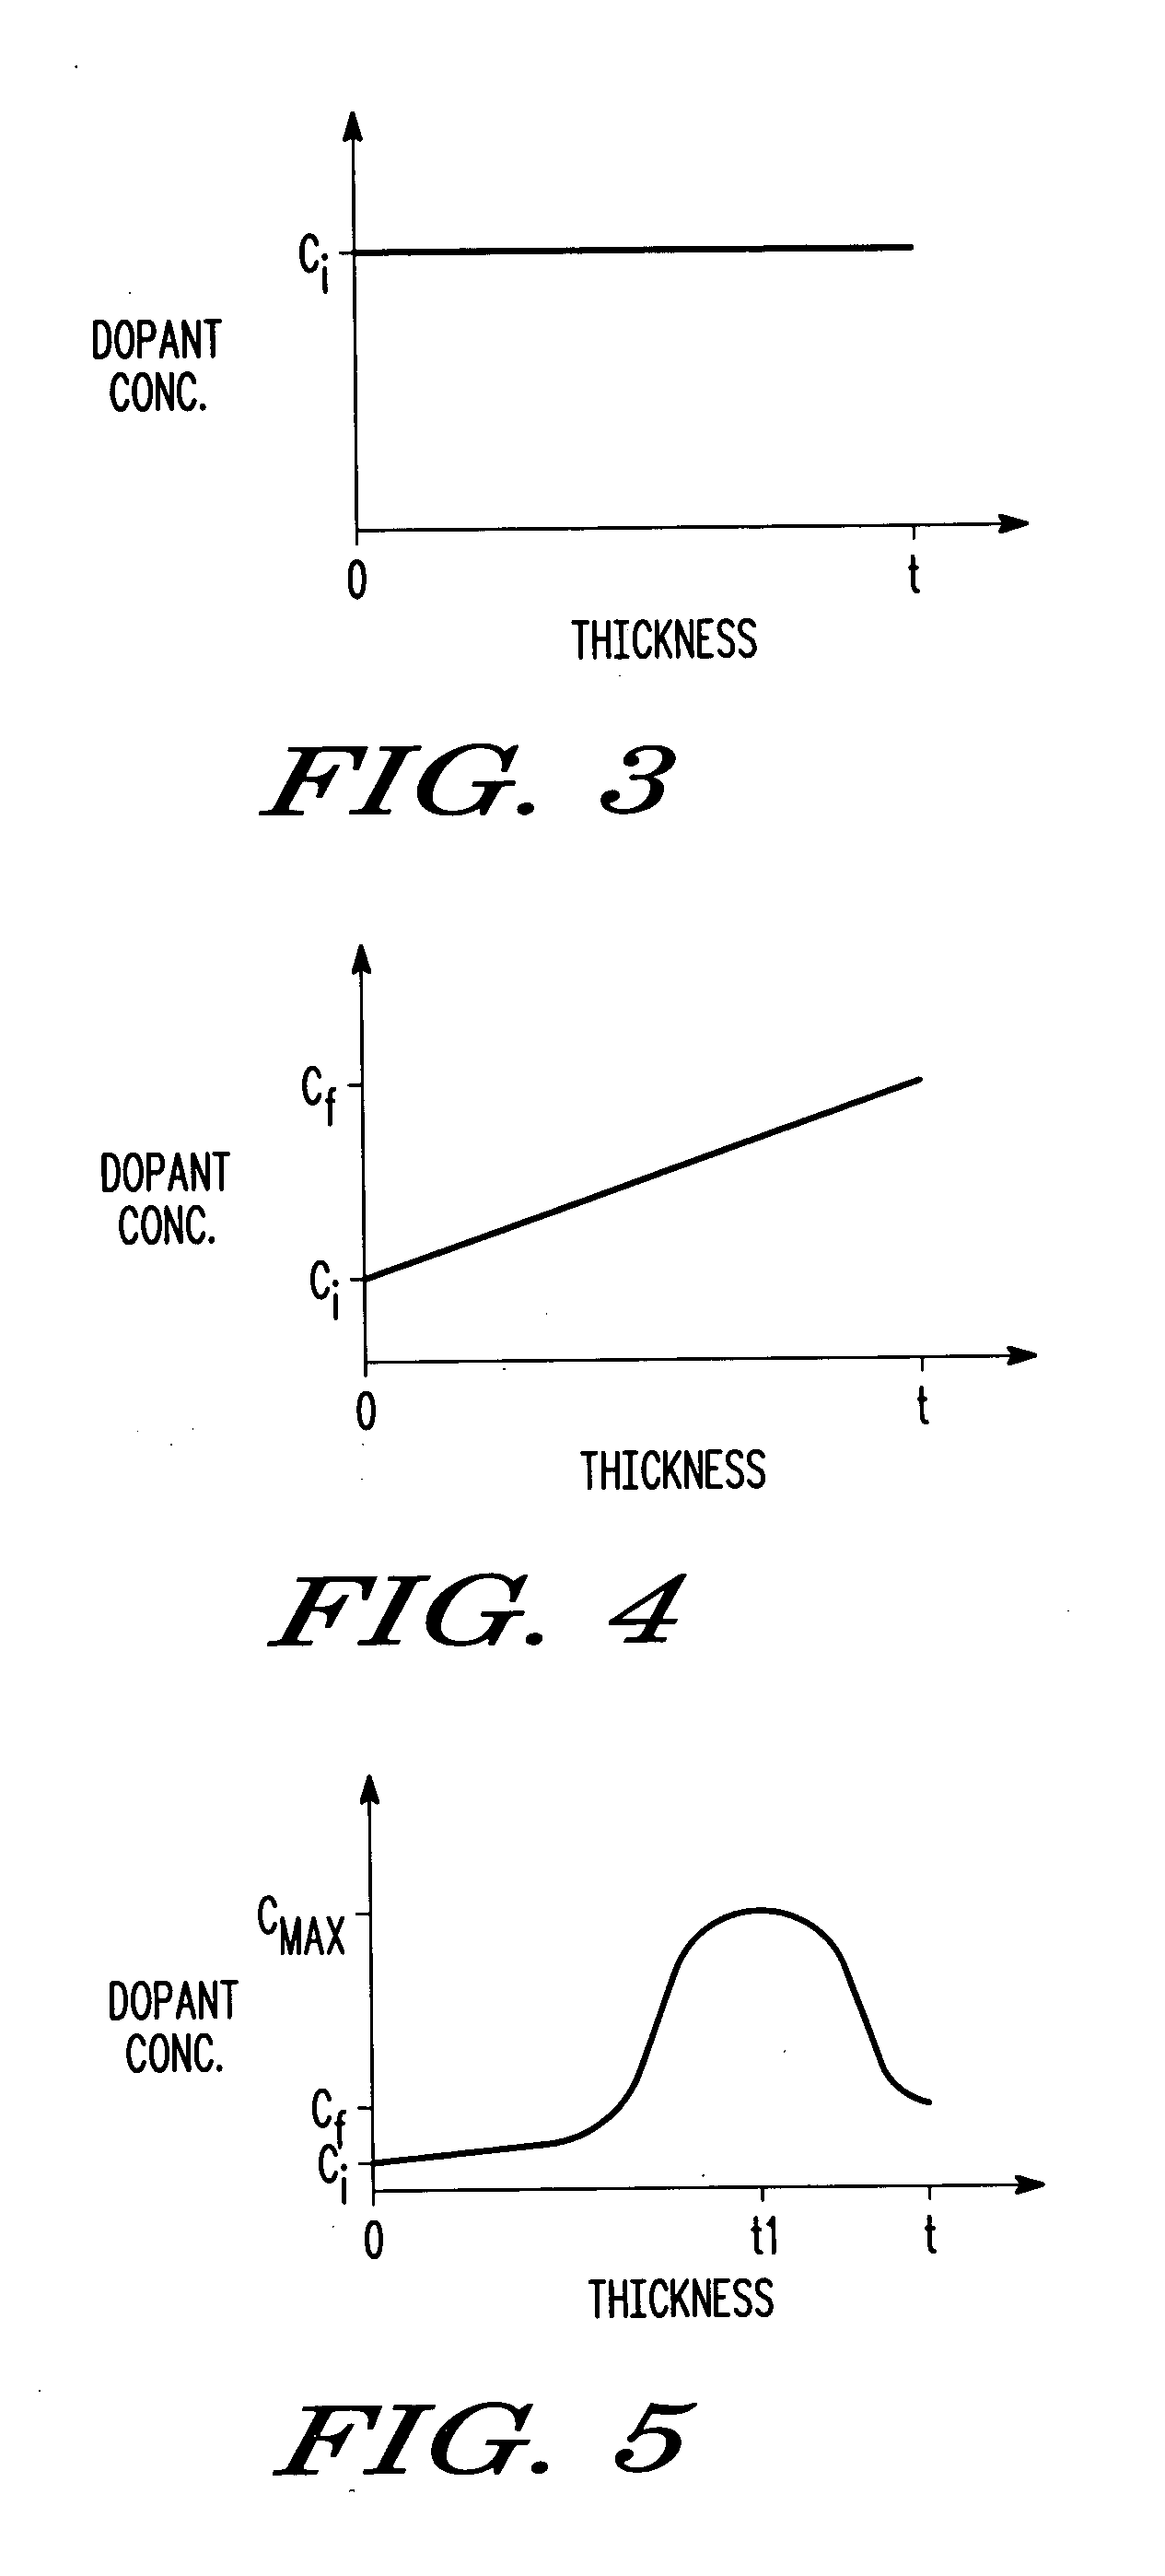 Semiconductor structures and methods of fabricating semiconductor structures comprising hafnium oxide modified with lanthanum, a lanthanide-series metal, or a combination thereof